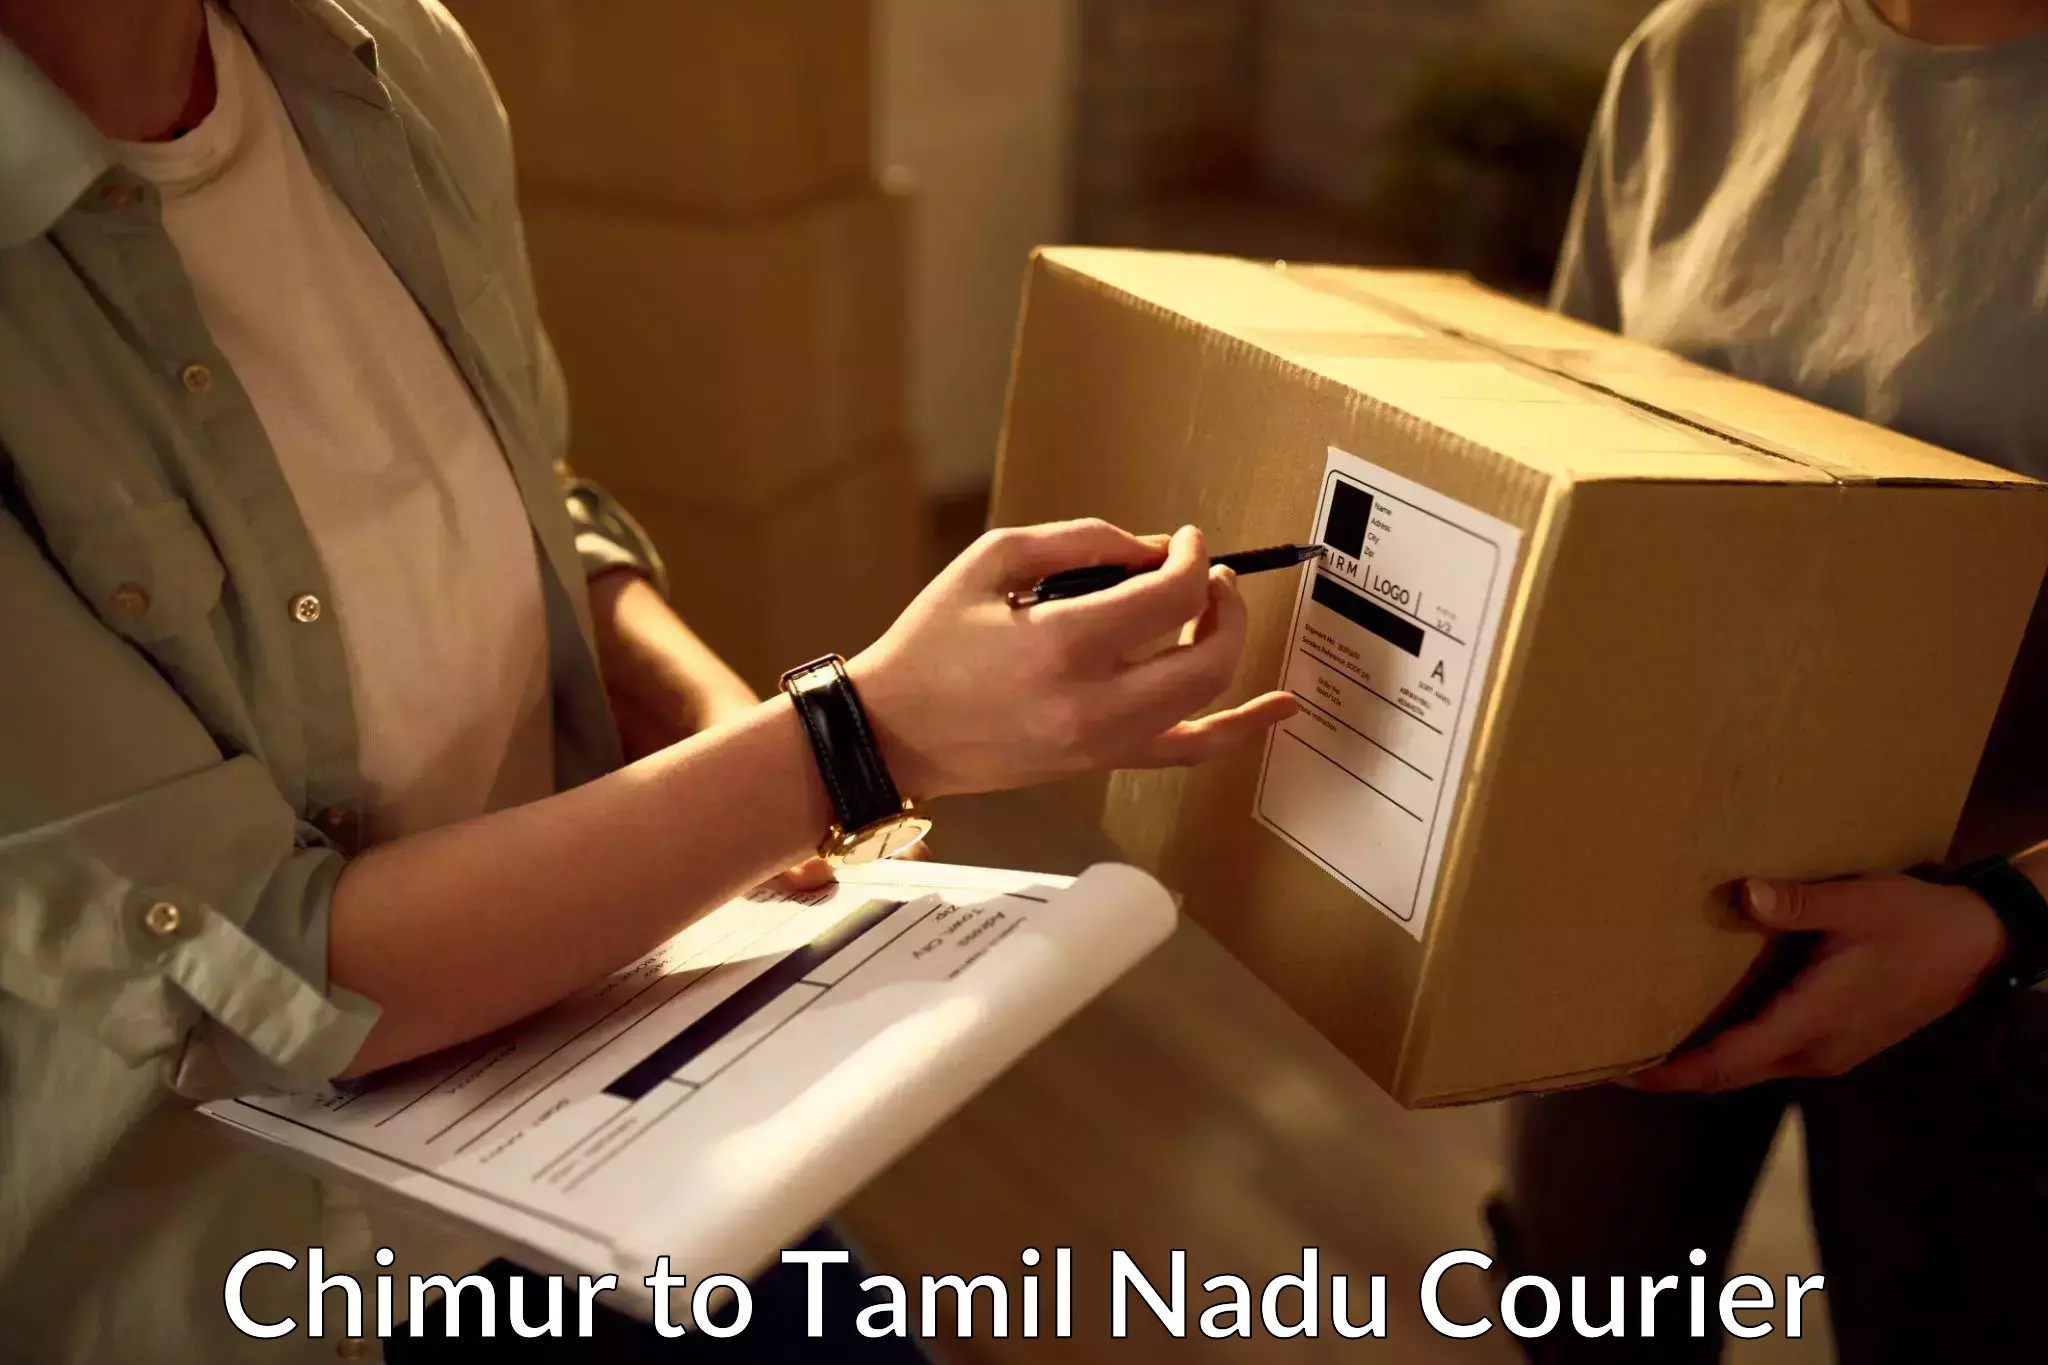 Lightweight courier Chimur to Chennai Port